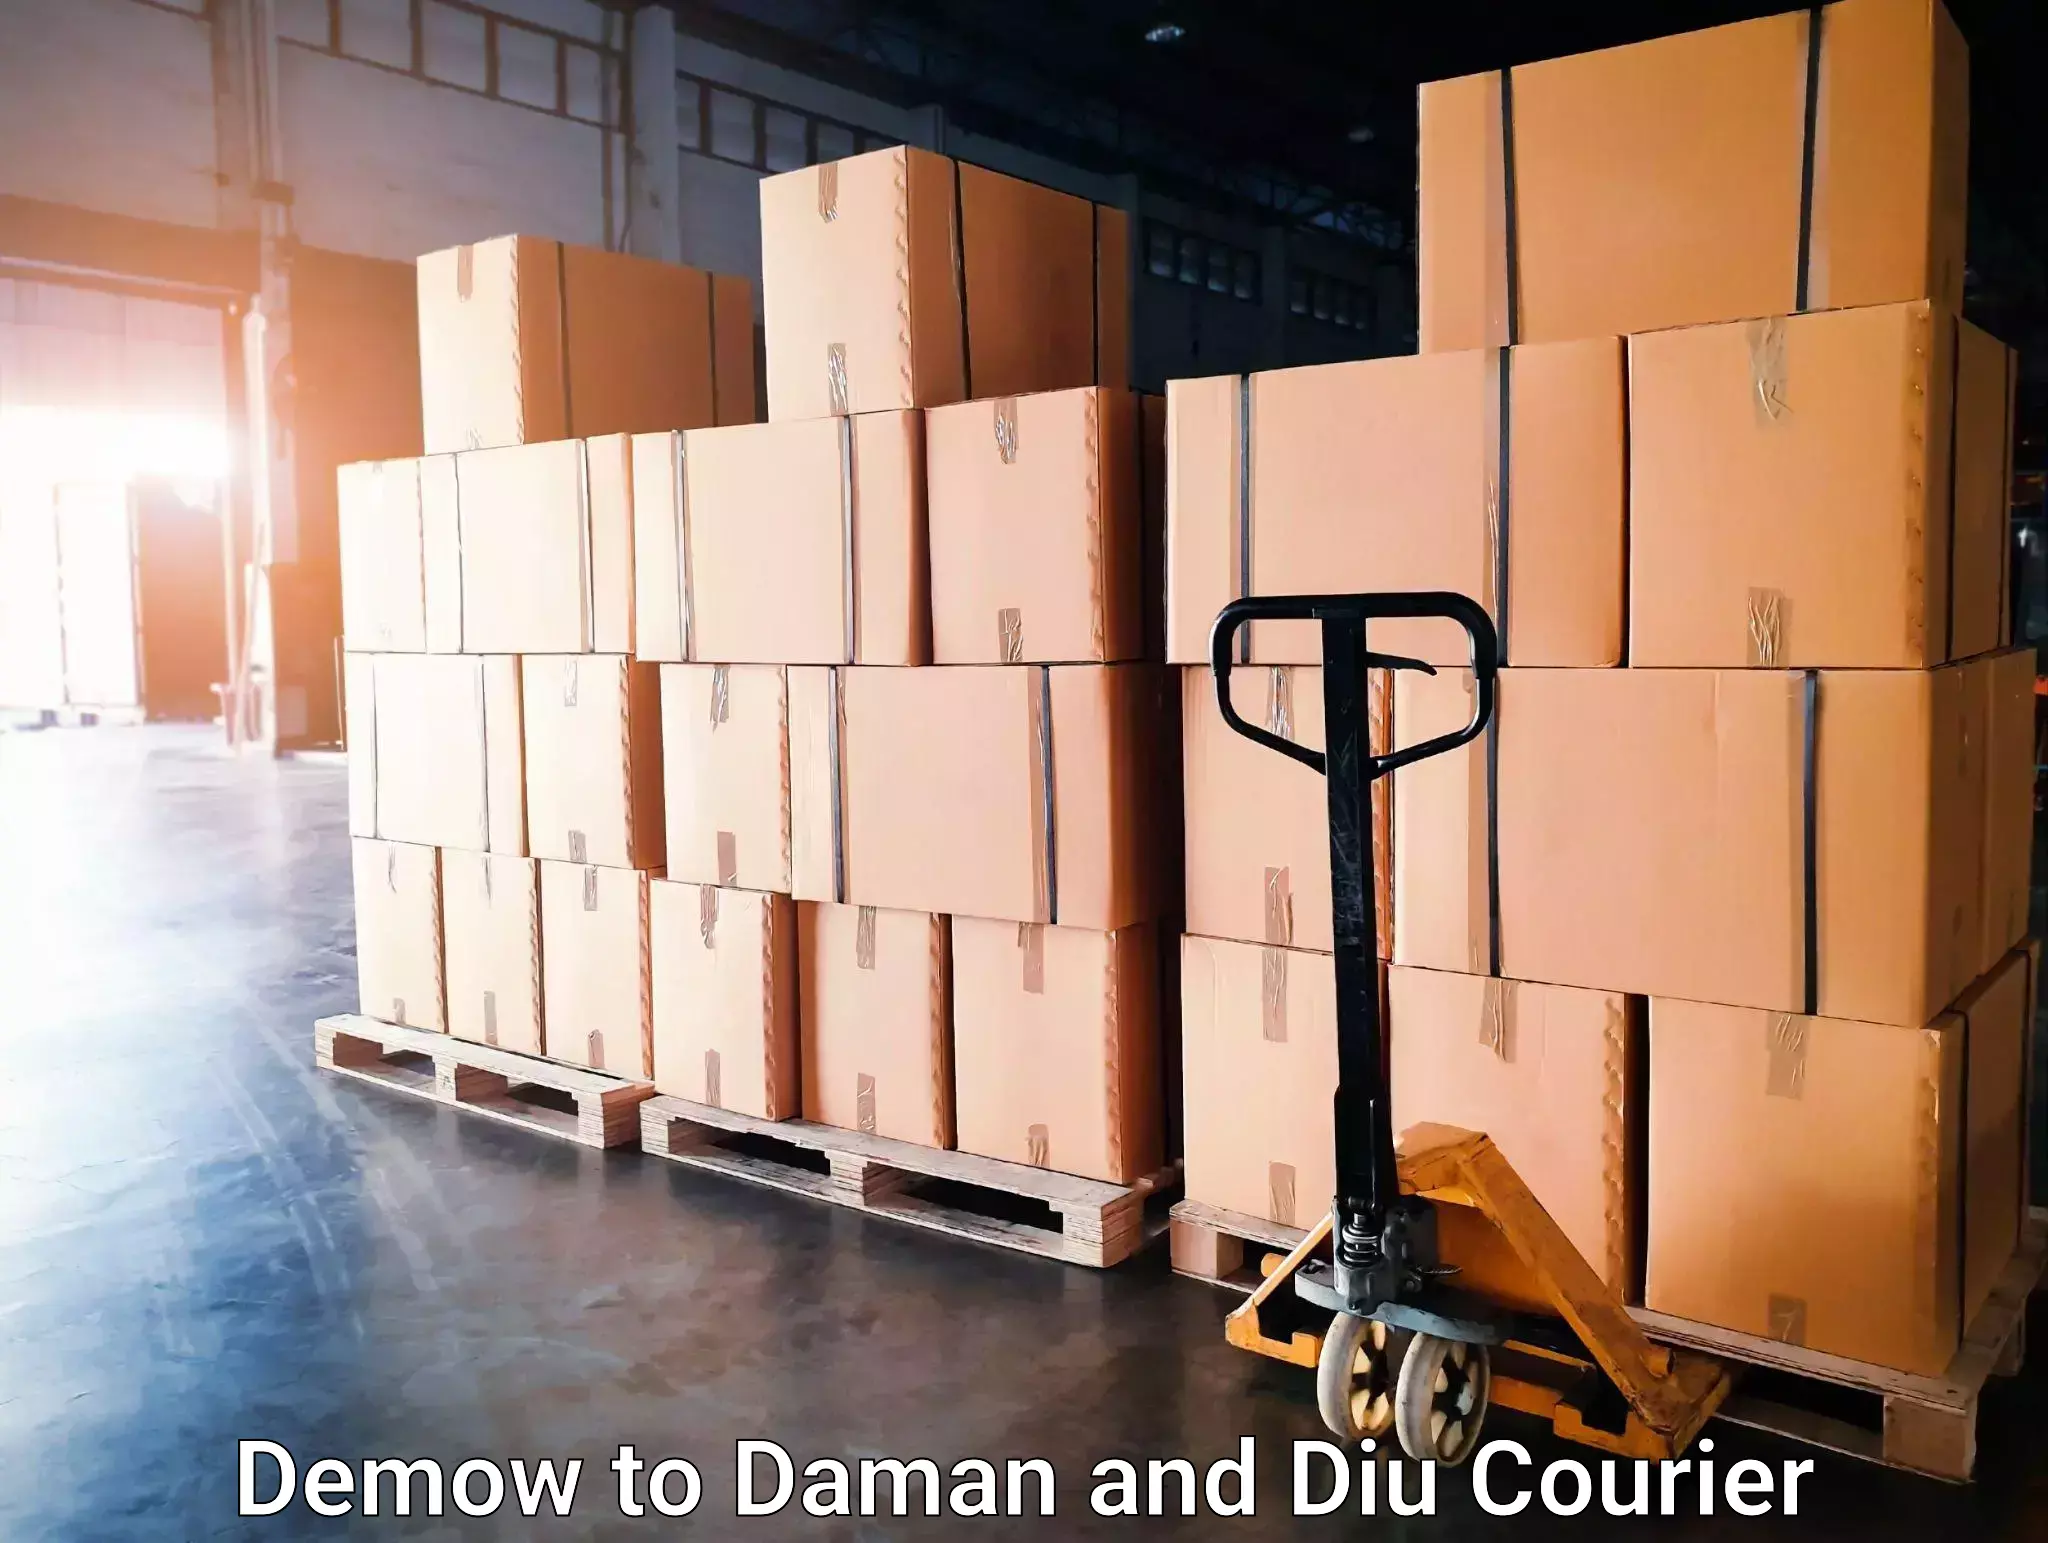 Nationwide courier service Demow to Daman and Diu